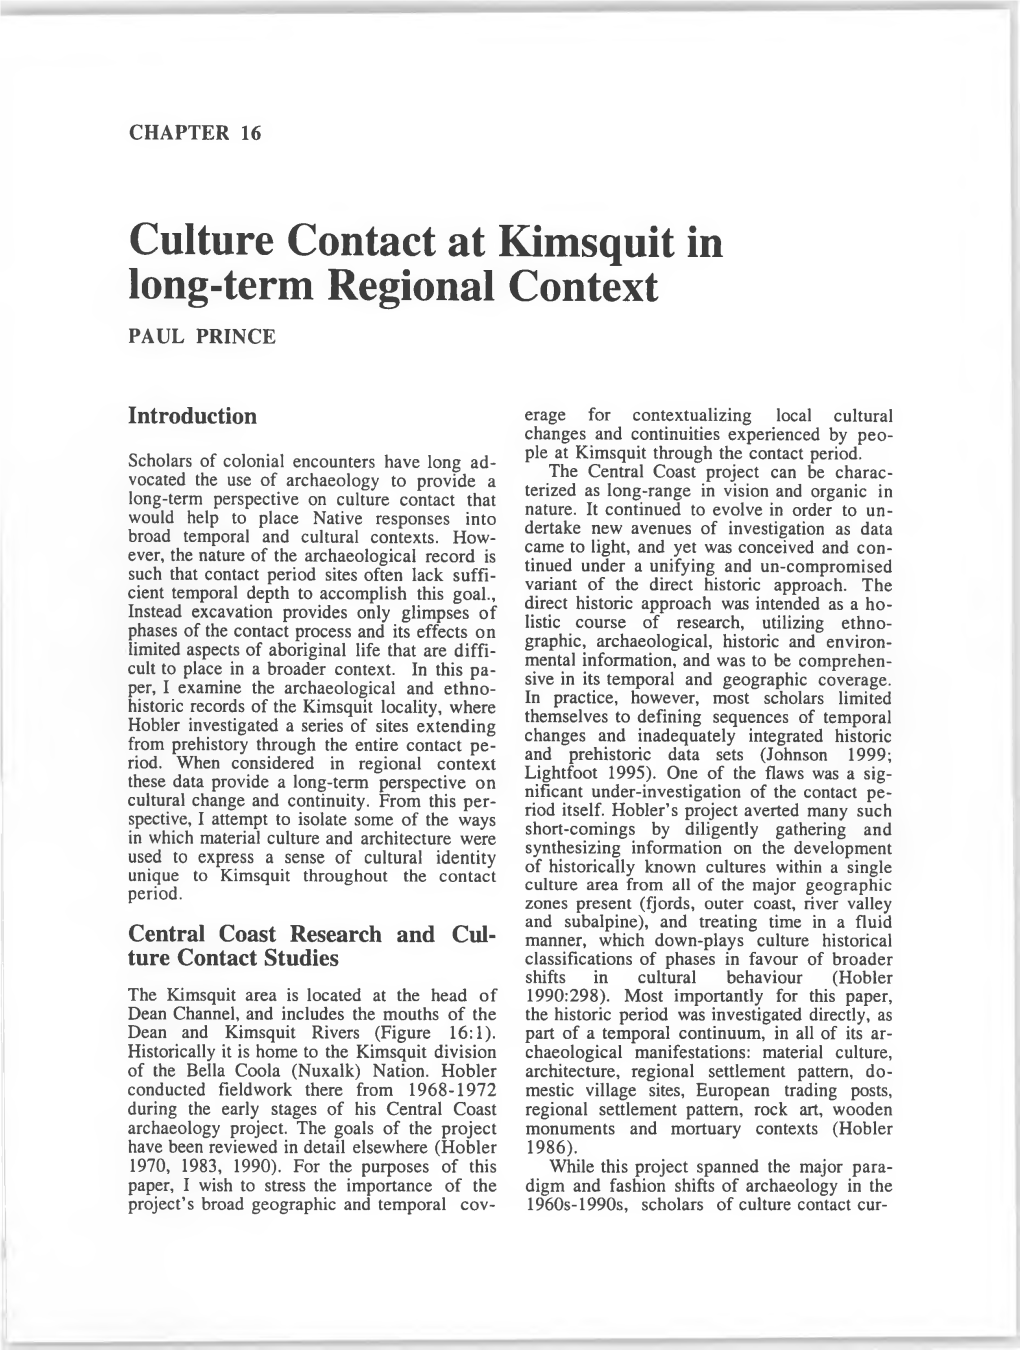 Culture Contact at Kimsquit in Long-Term Regional Context